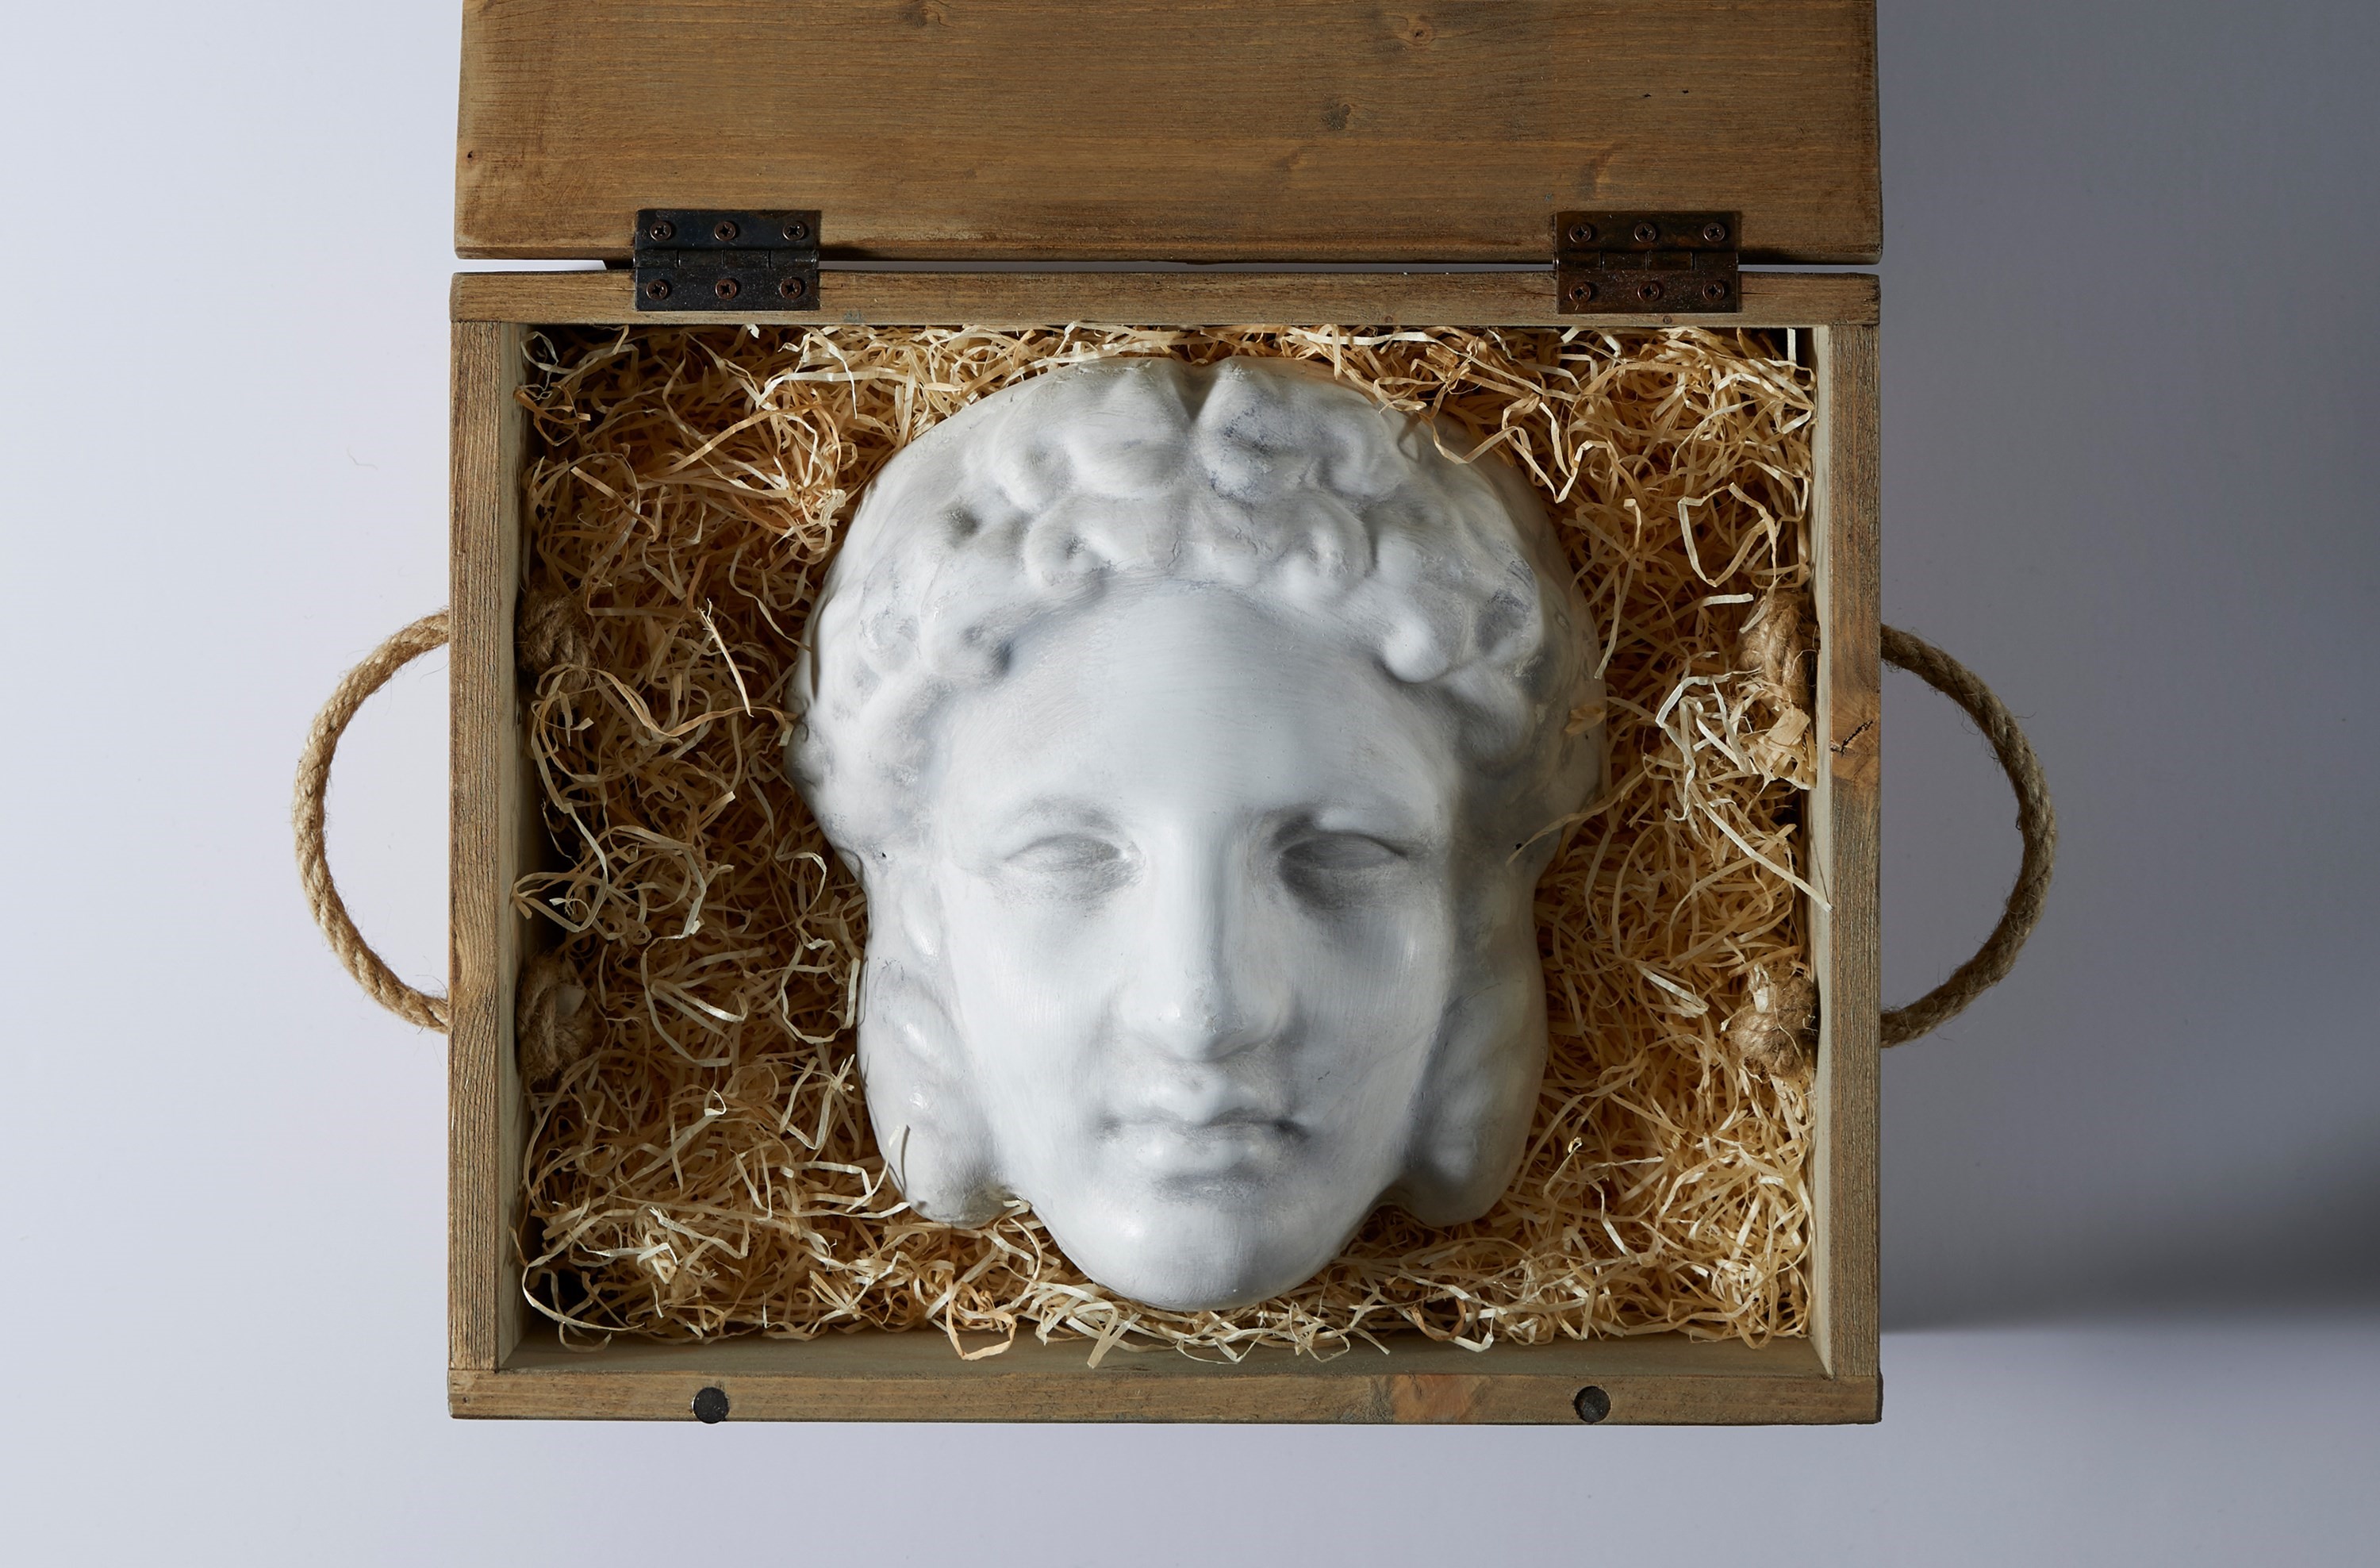 Exclusive: This Season's Gucci Invitation is an Ancient Greek Mask | AnOther